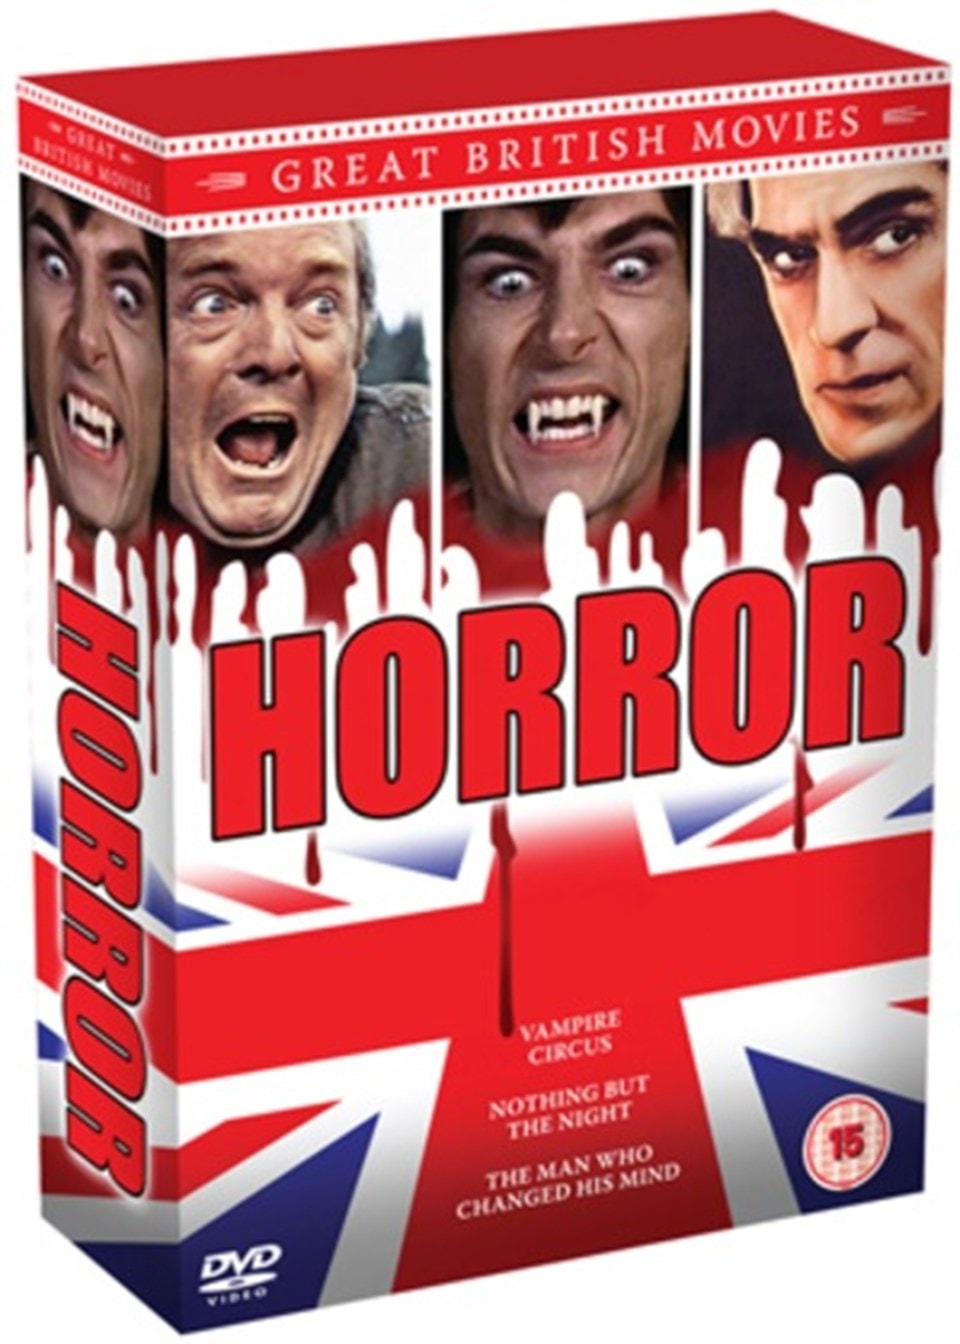 Great British Movies Horror DVD Box Set Free shipping over £20